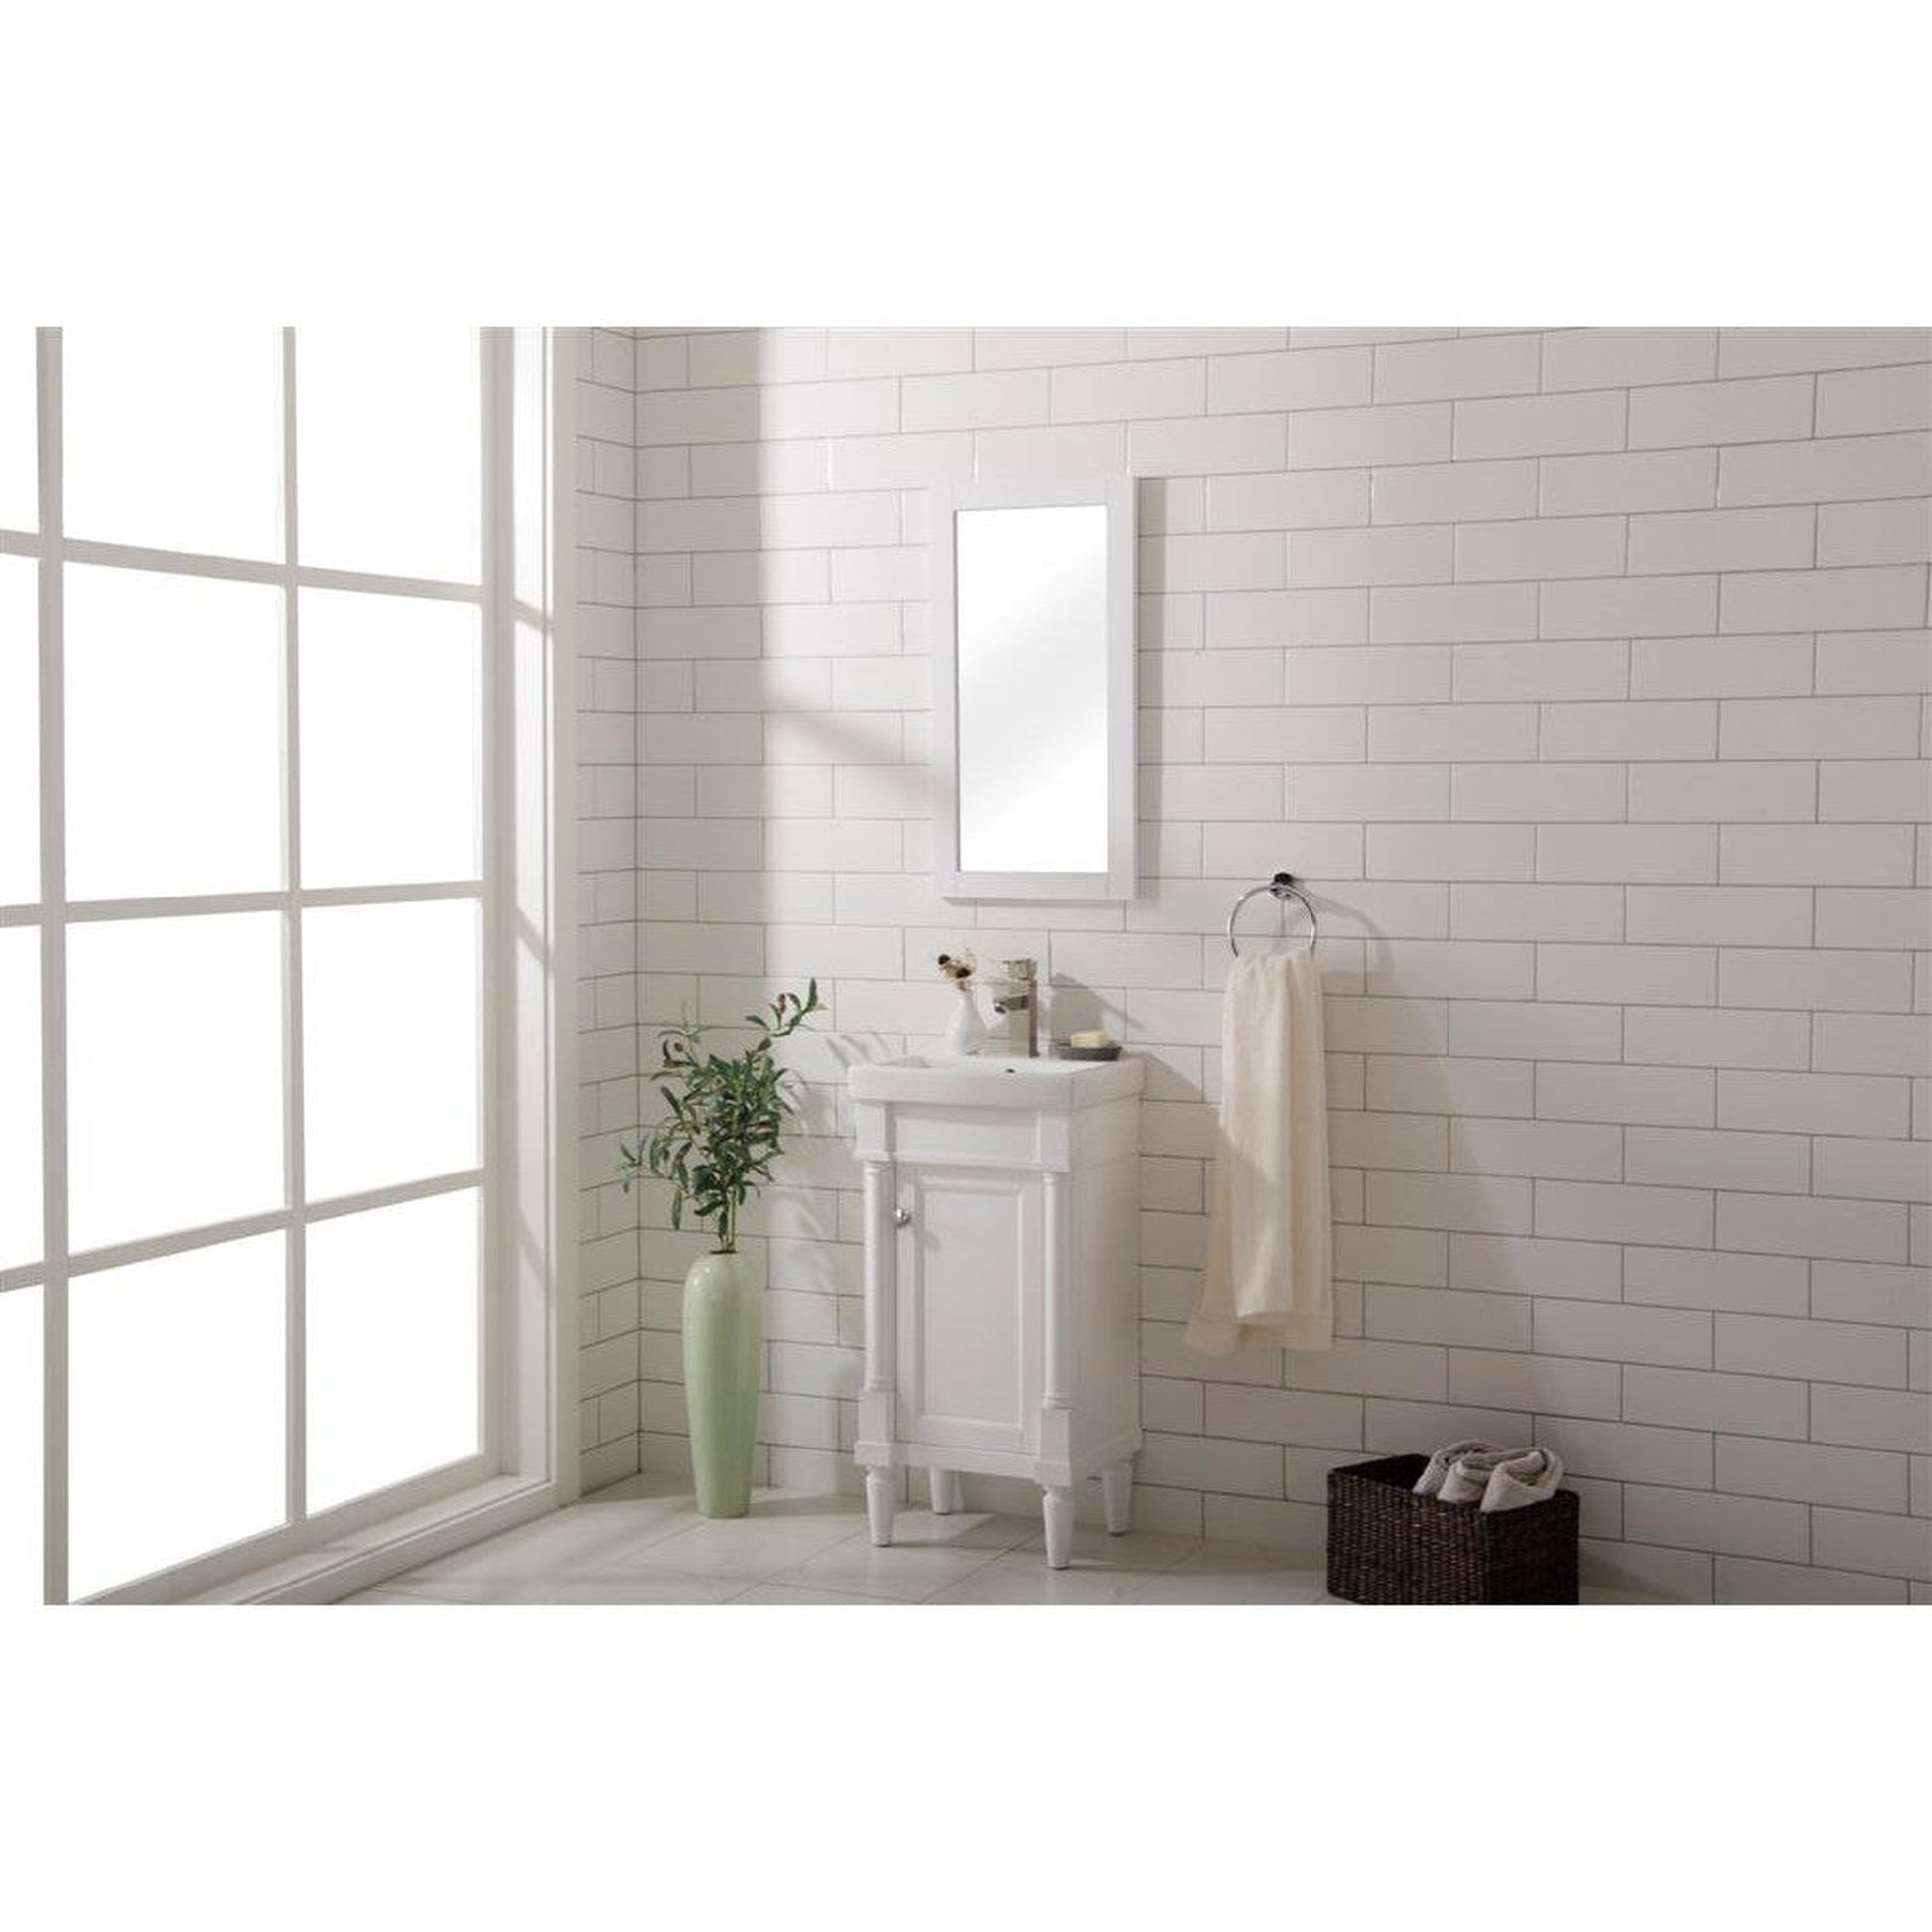 Legion Furniture WLF9218 18" White Freestanding Vanity Cabinet With White Ceramic Top and Sink